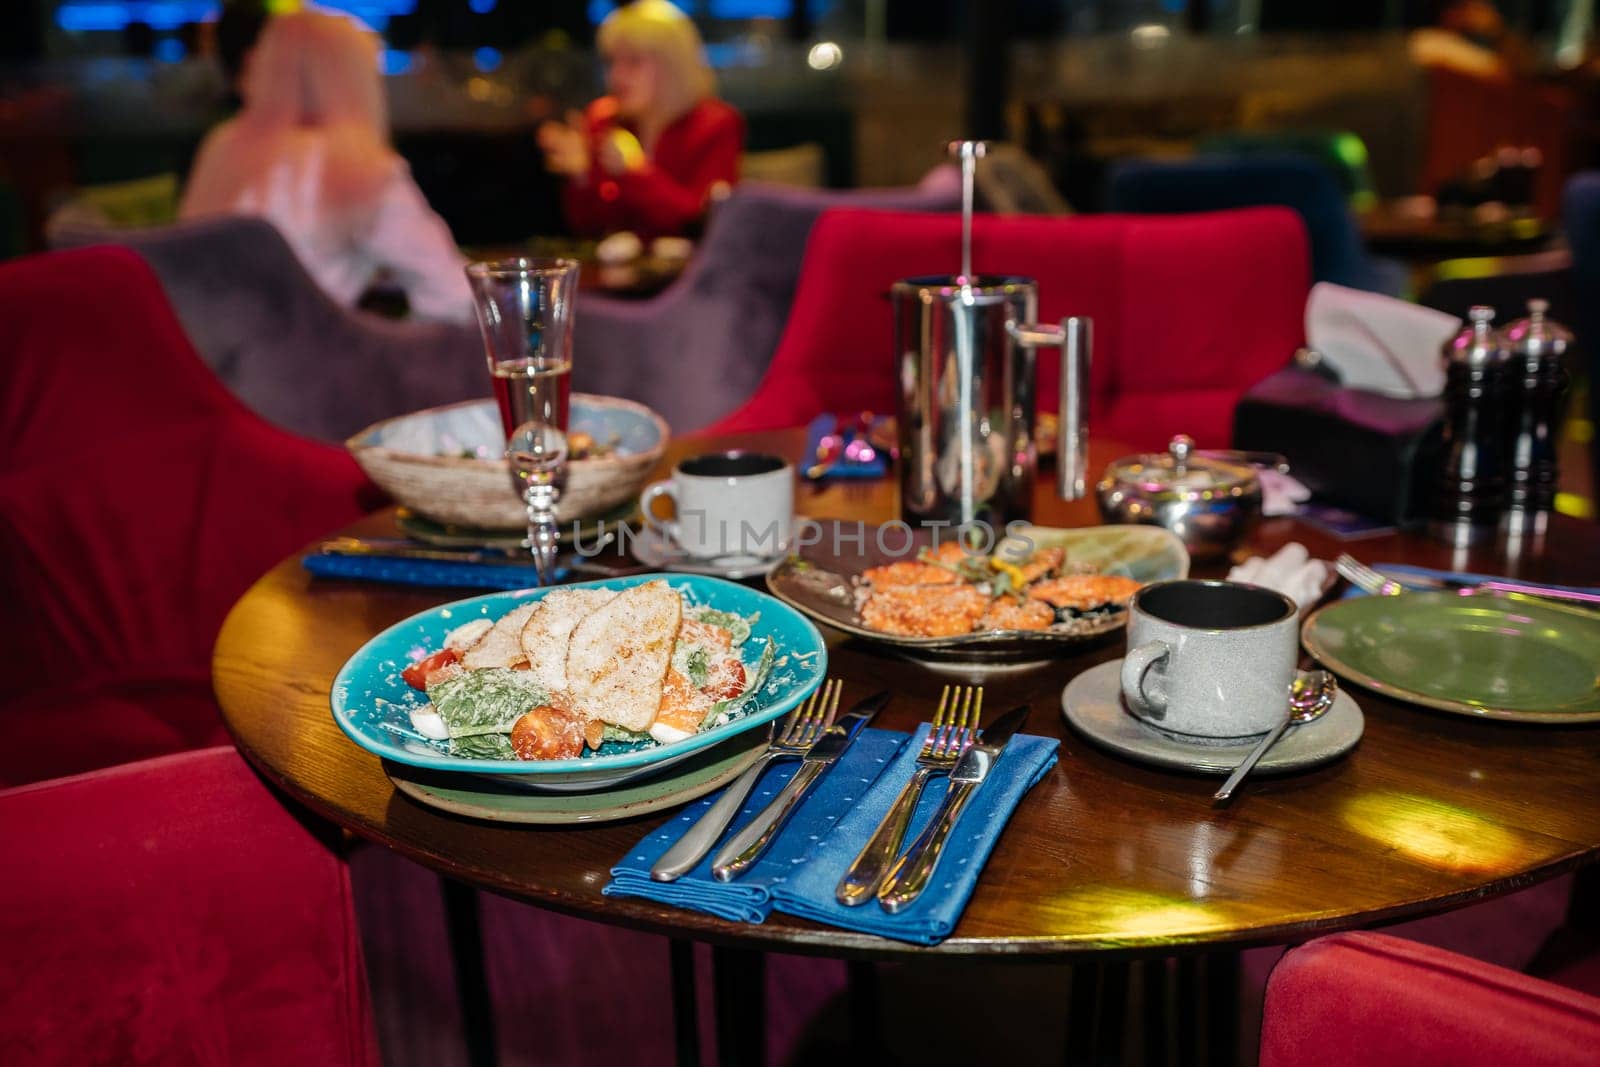 A table with a blue plate of salad and a cup of coffee. The table is set with silverware and a few cups. Scene is casual and inviting, as it is a restaurant setting with people enjoying their meals. by Matiunina